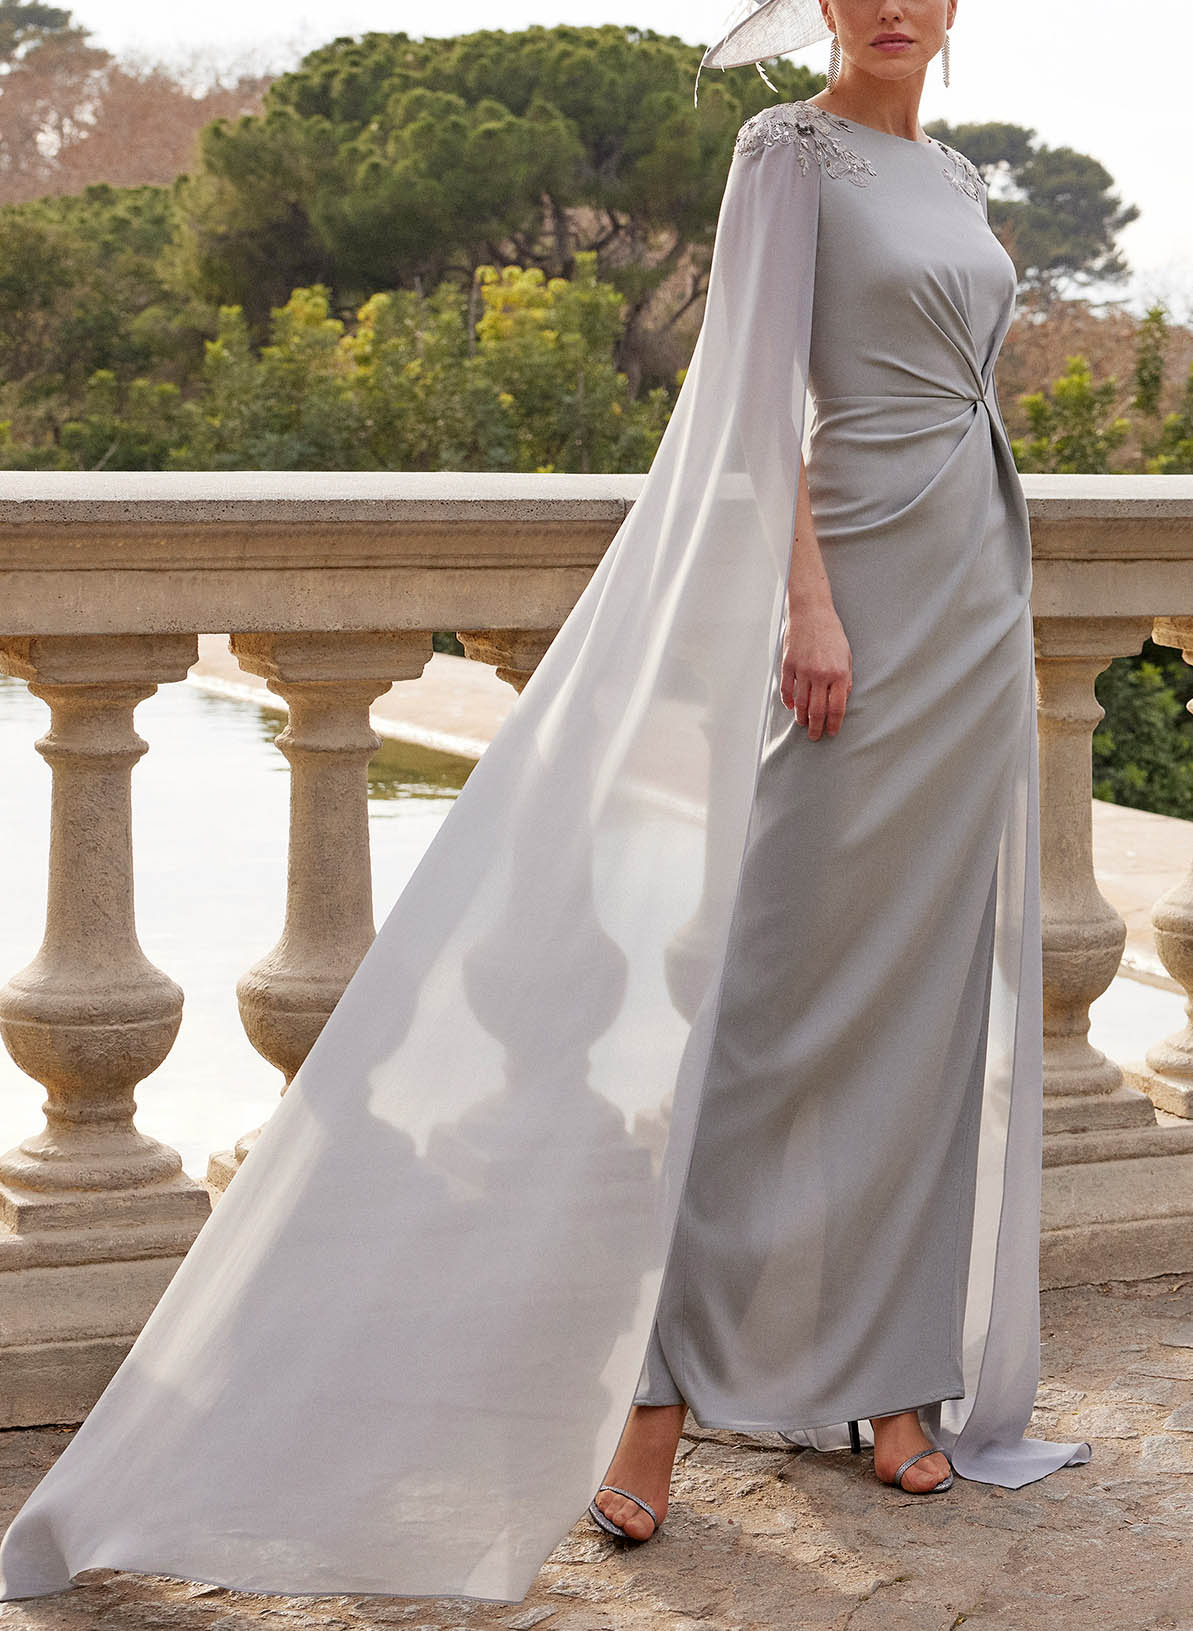 Wrap Chiffon Sheath/Column Mother Of The Bride Dresses With Beading